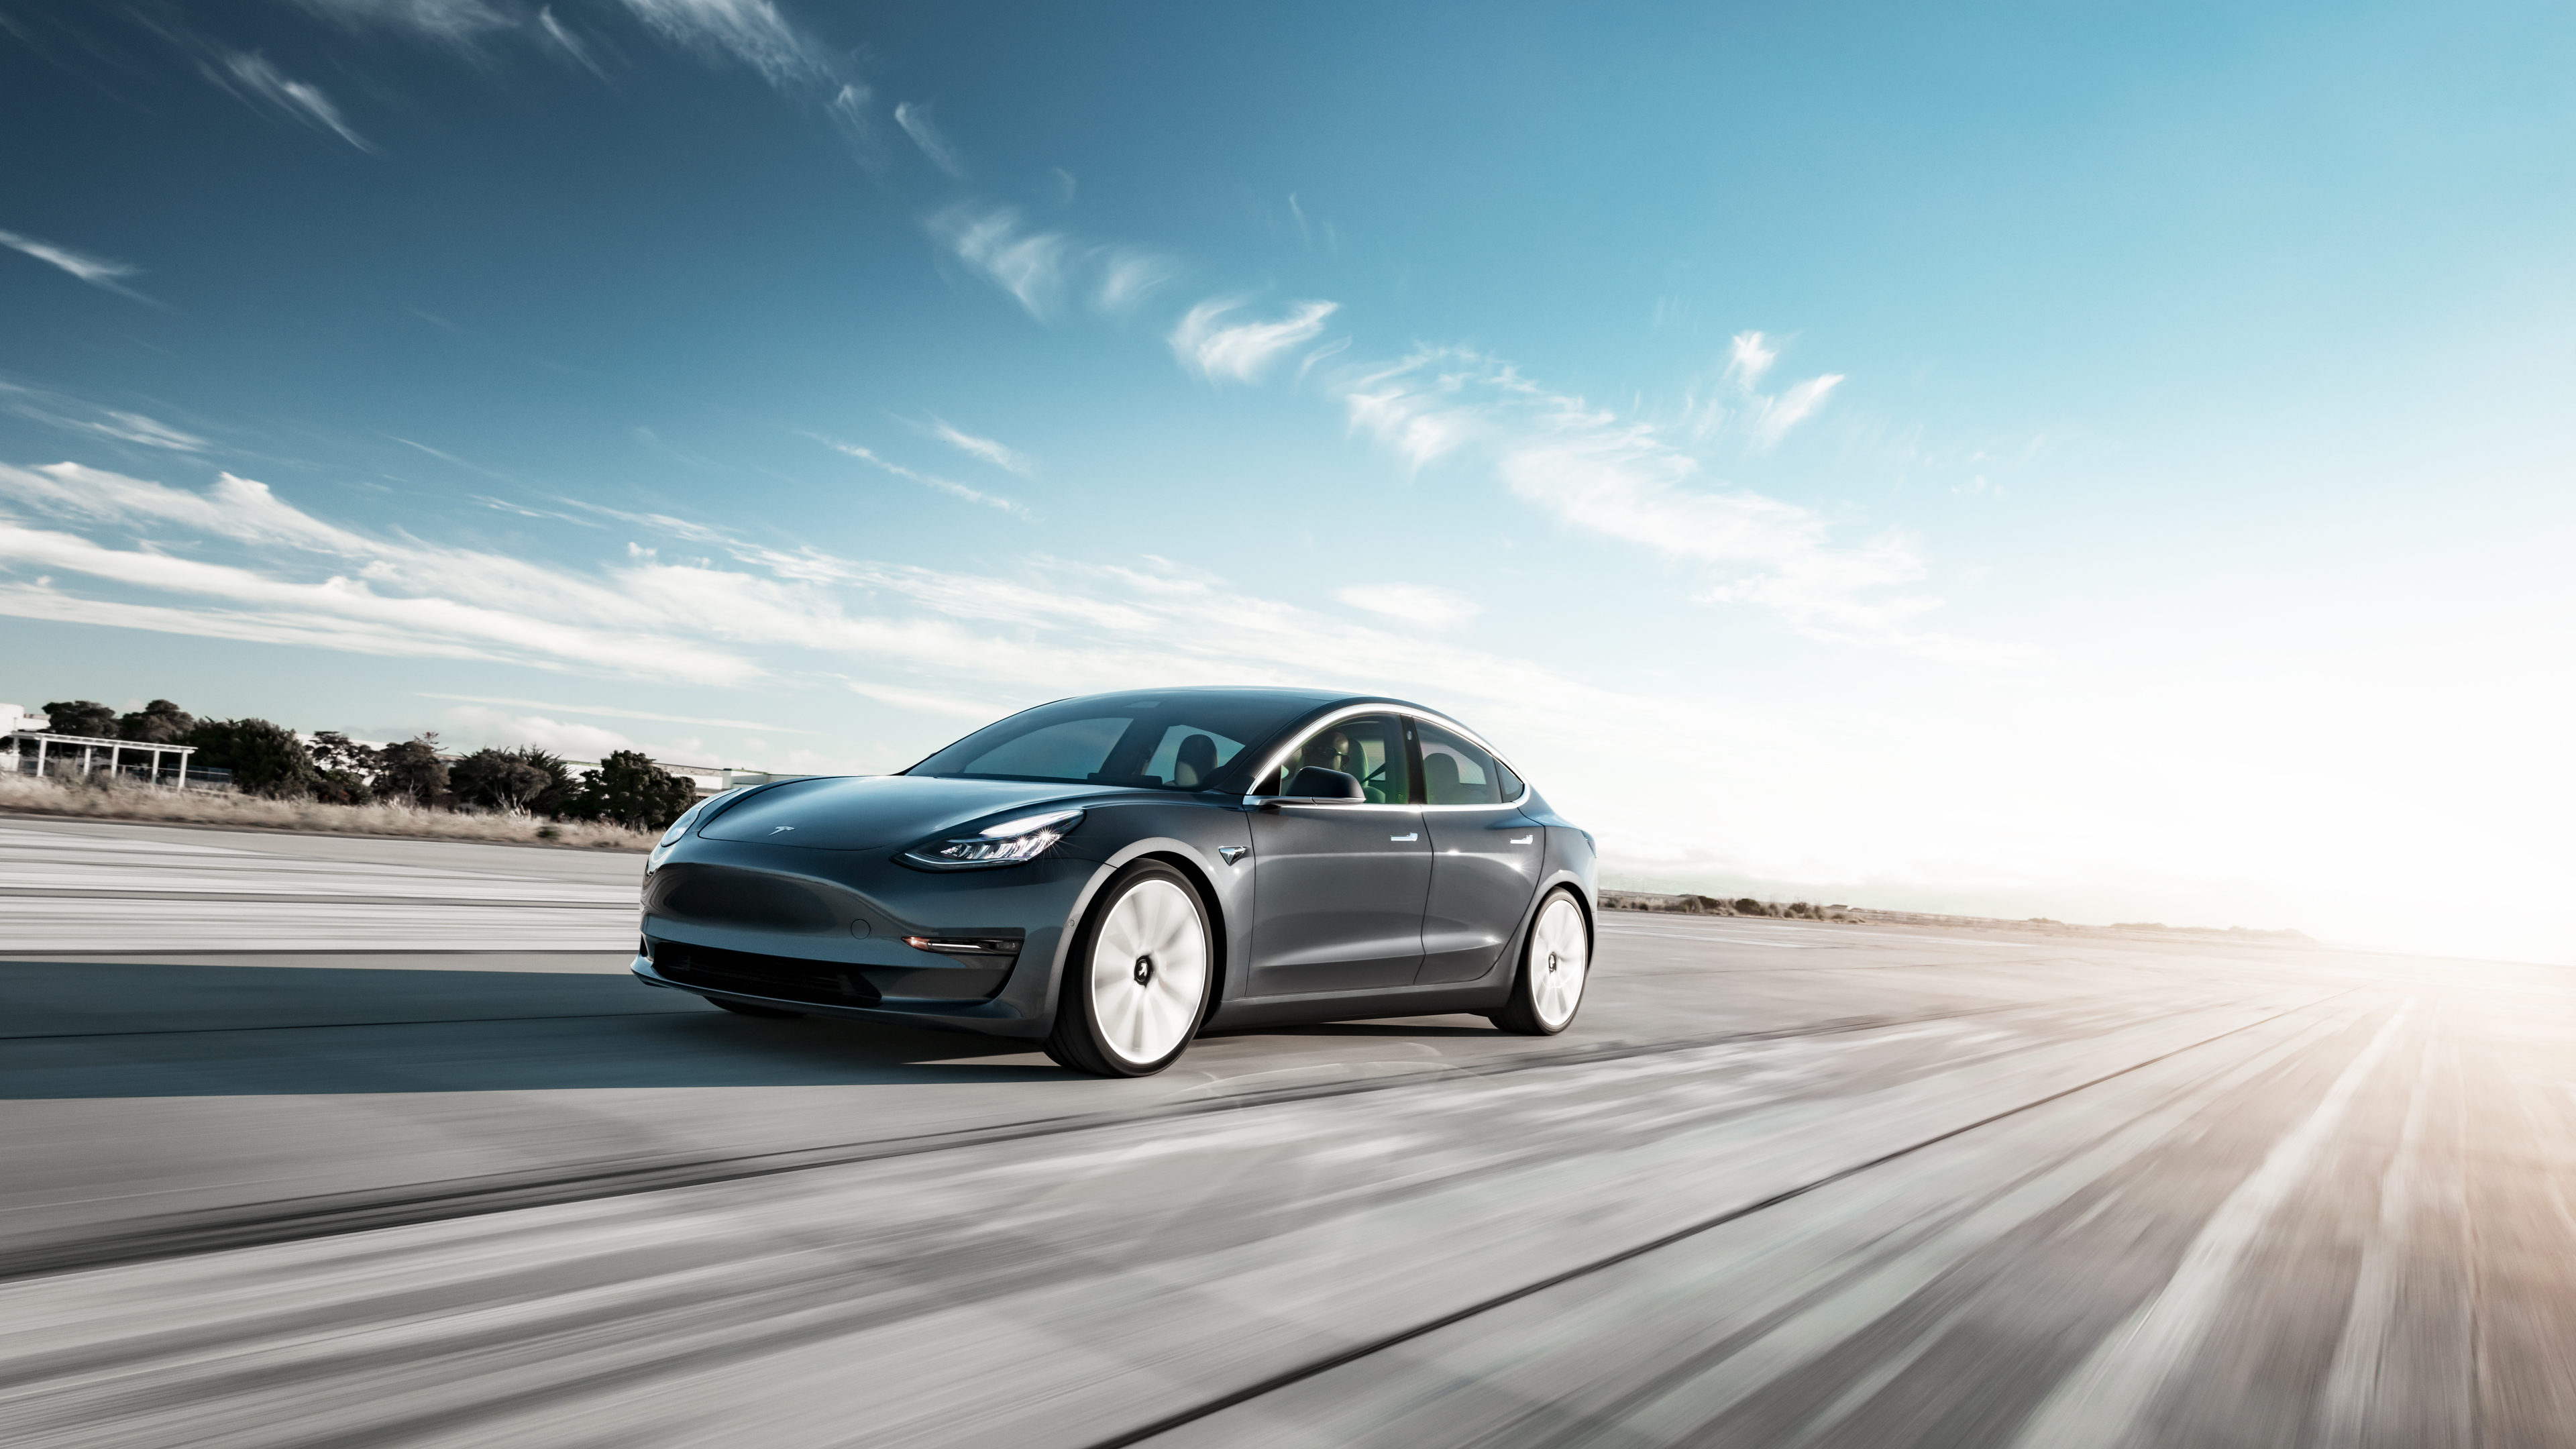 Tesla delivers 405,278 vehicles in Q4, missing Wall Street expectations |  TechCrunch